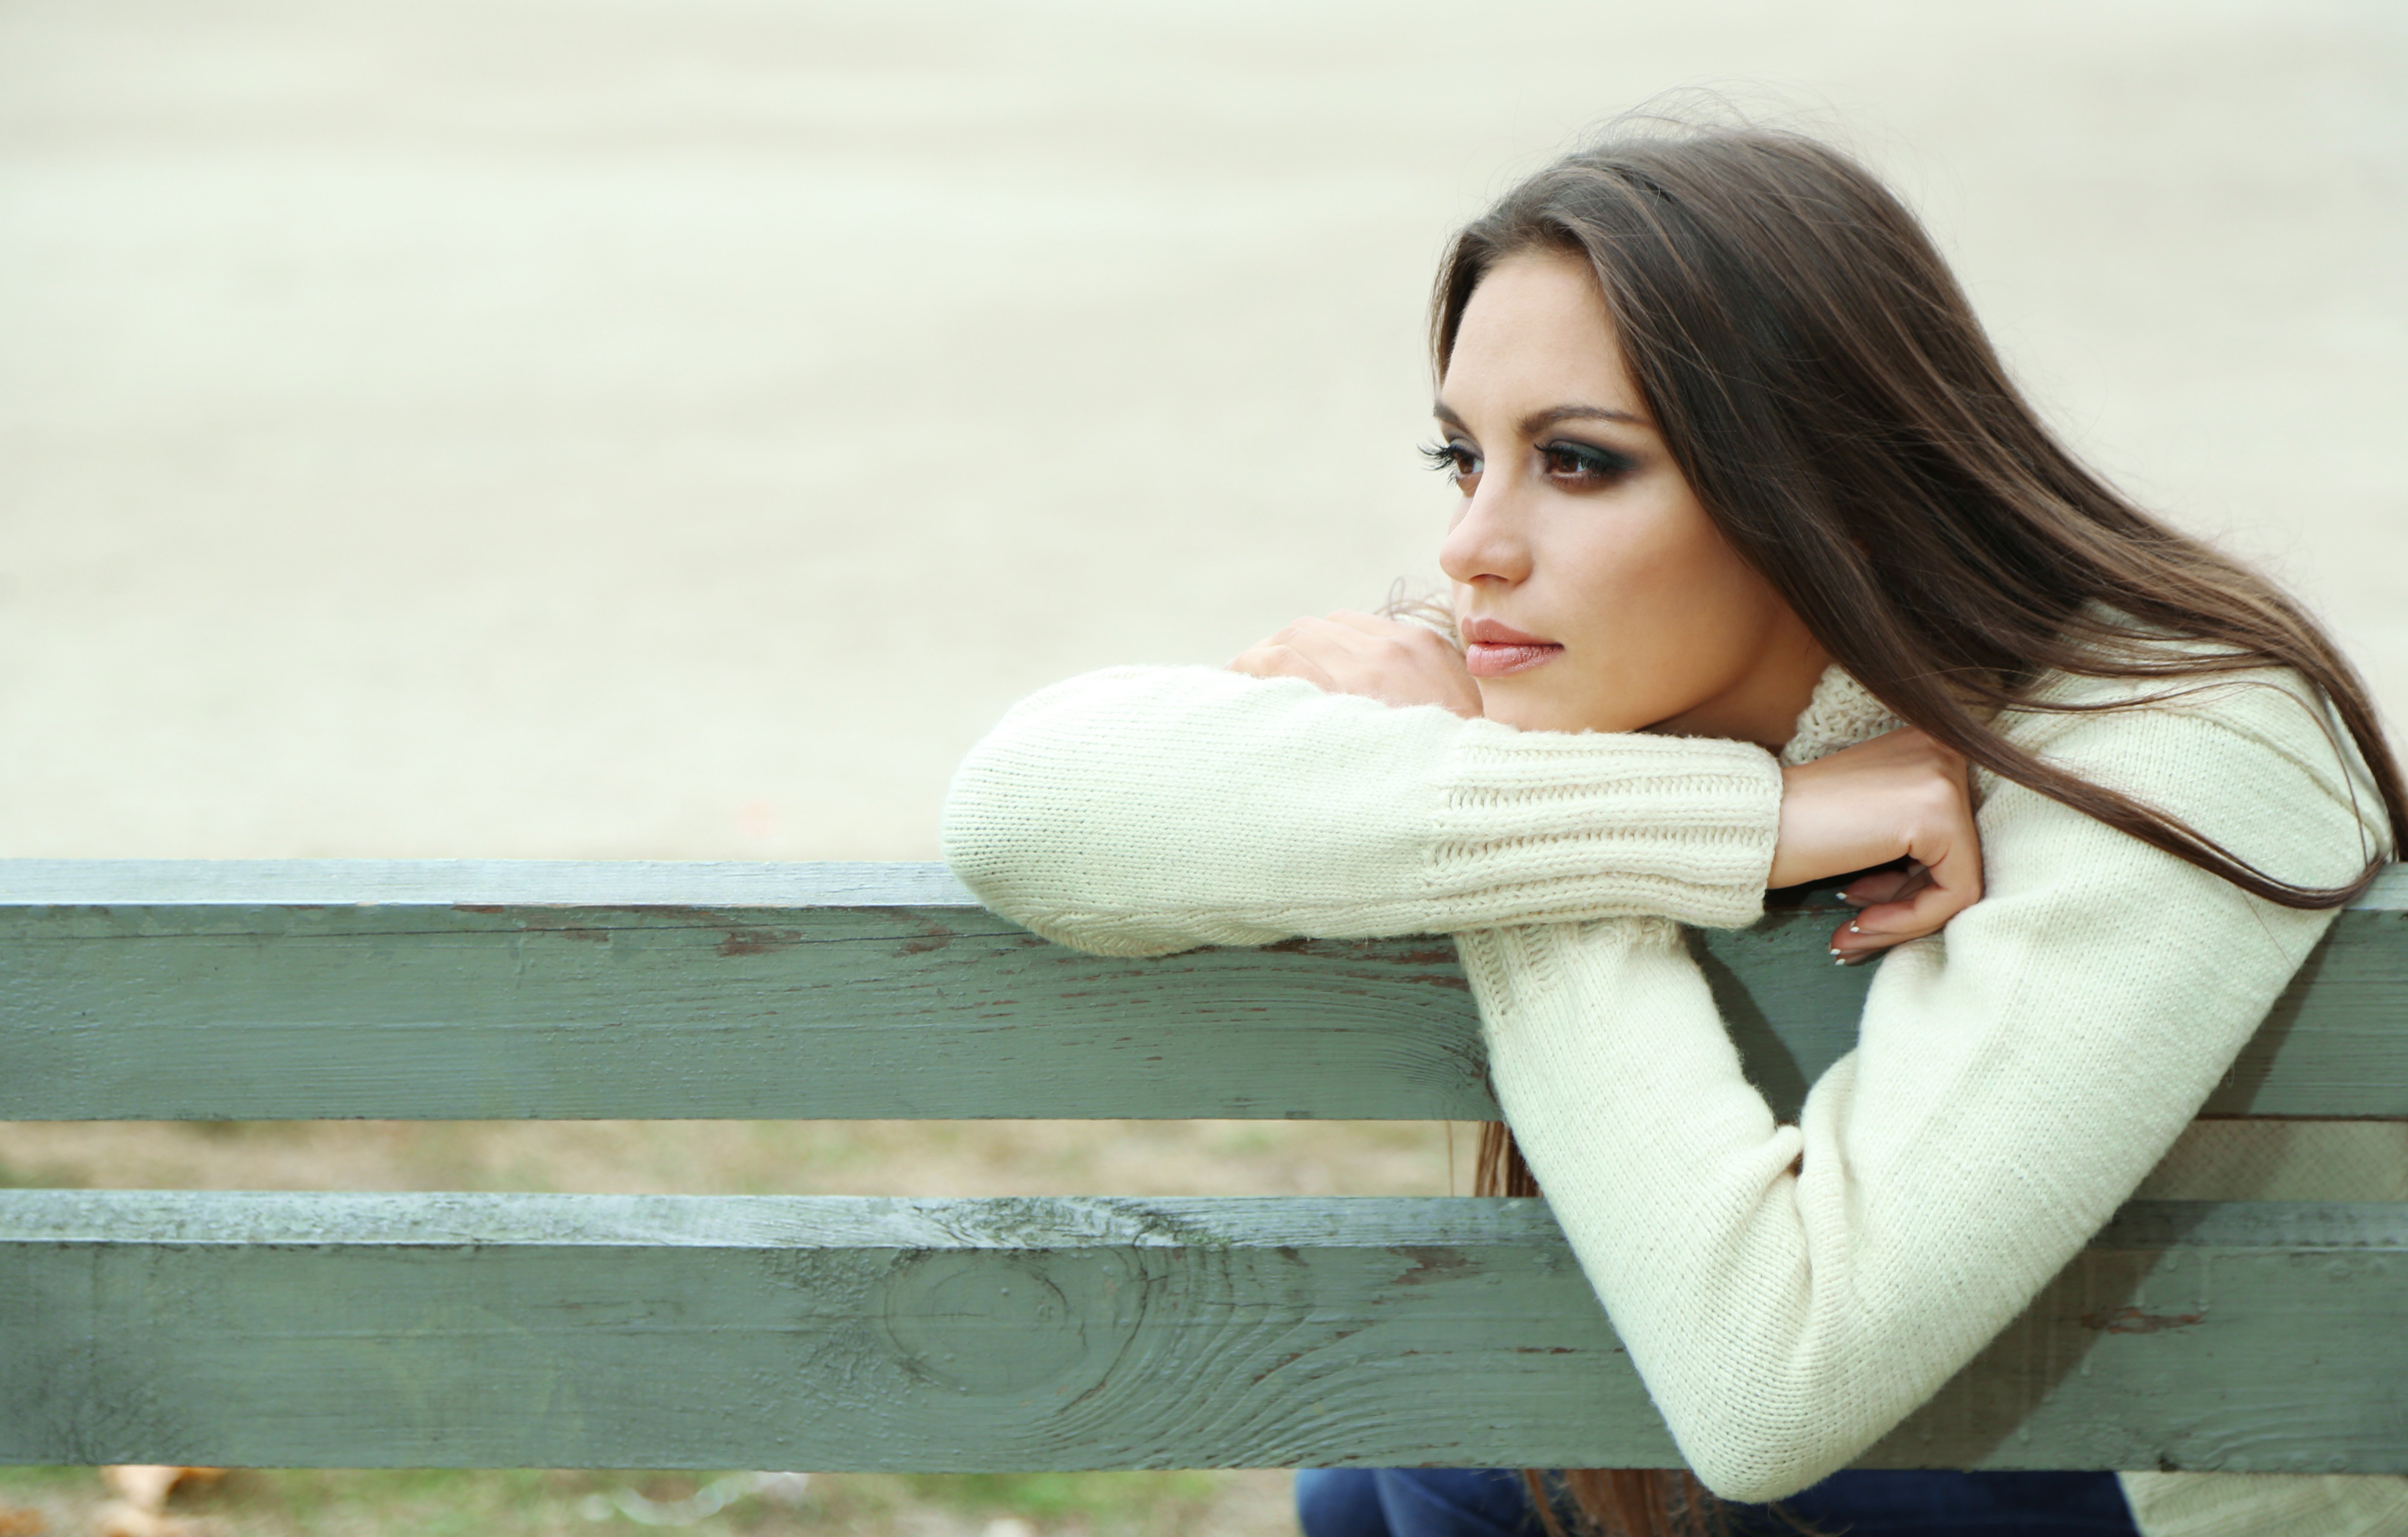 lonely, Mood, Sad, Alone, Sadness, Emotion, People, Loneliness, Solitude, Sorrow, Girl, Babe, Bench Wallpaper